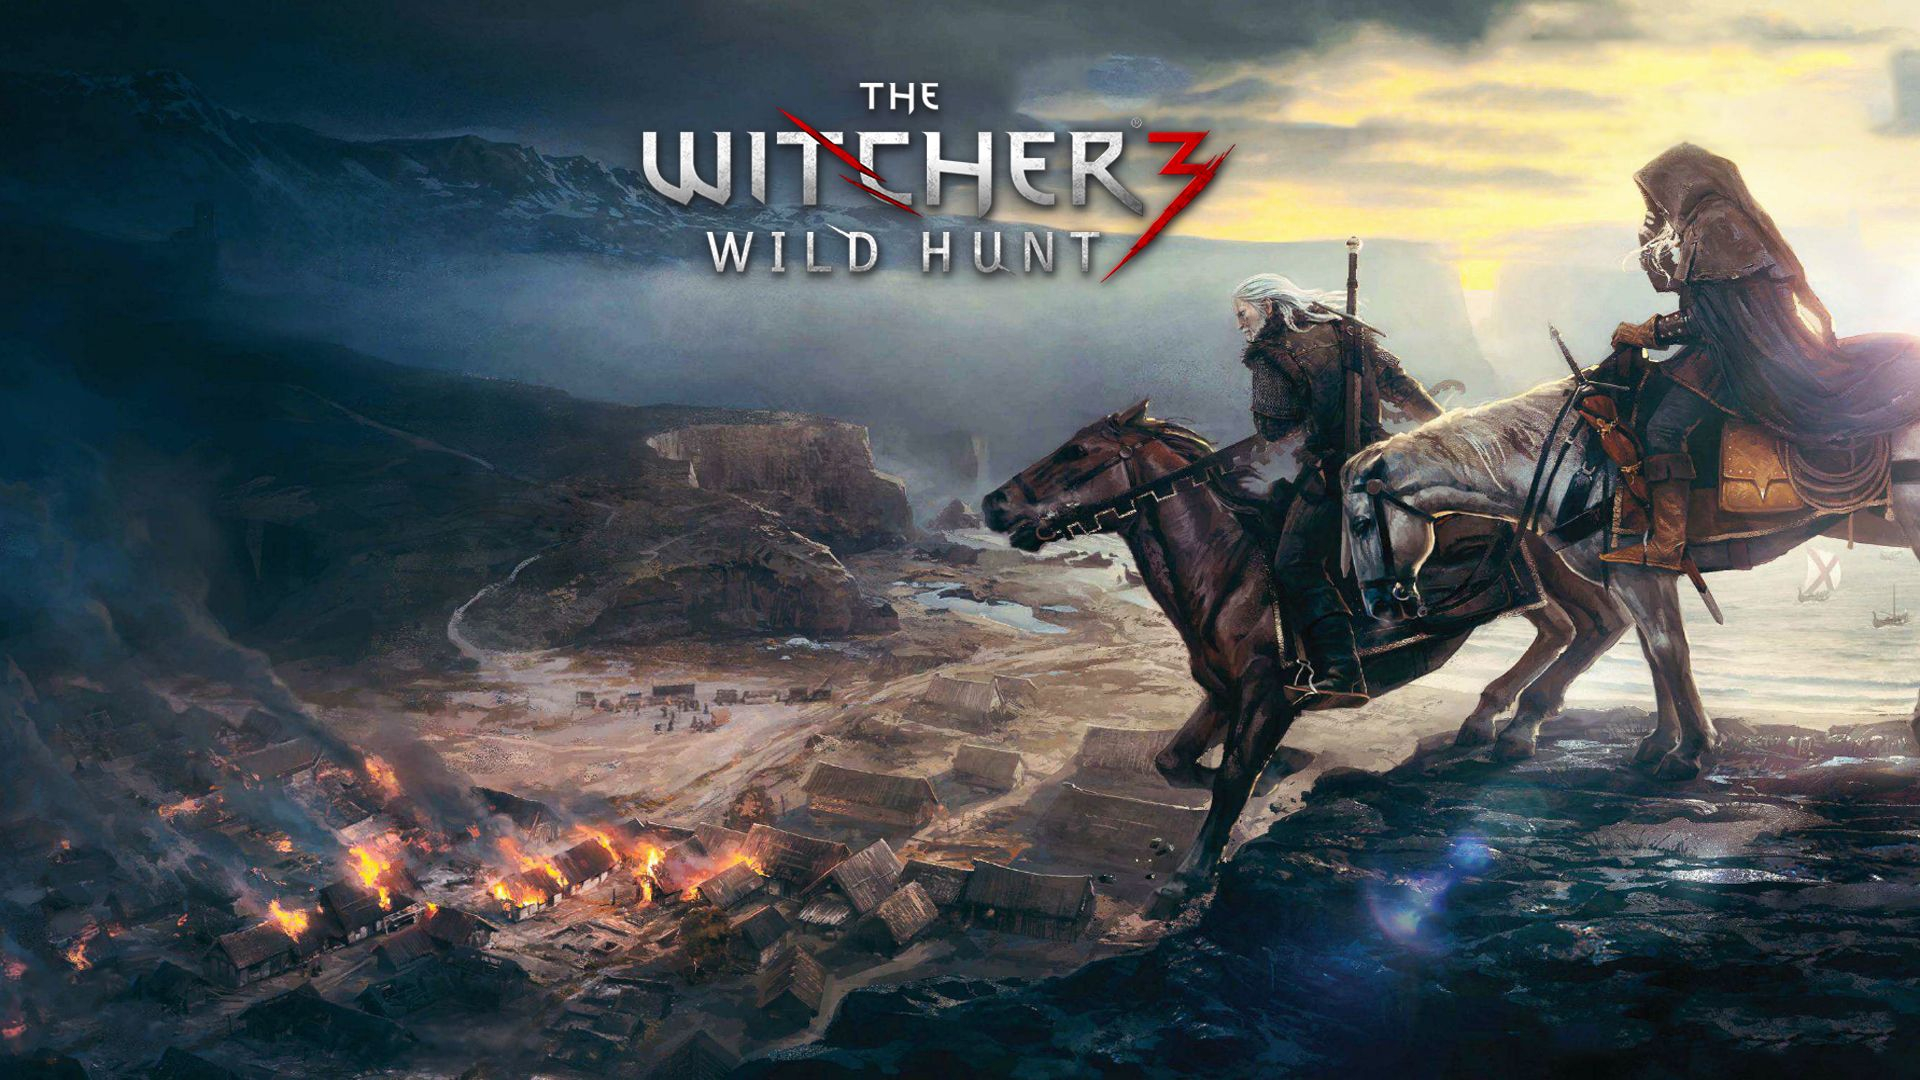 1920x1080 the witcher 3 wild hunt wallpaper 1080p Game HD Wallpapers | The witcher wild hunt, The witcher, The witcher 3